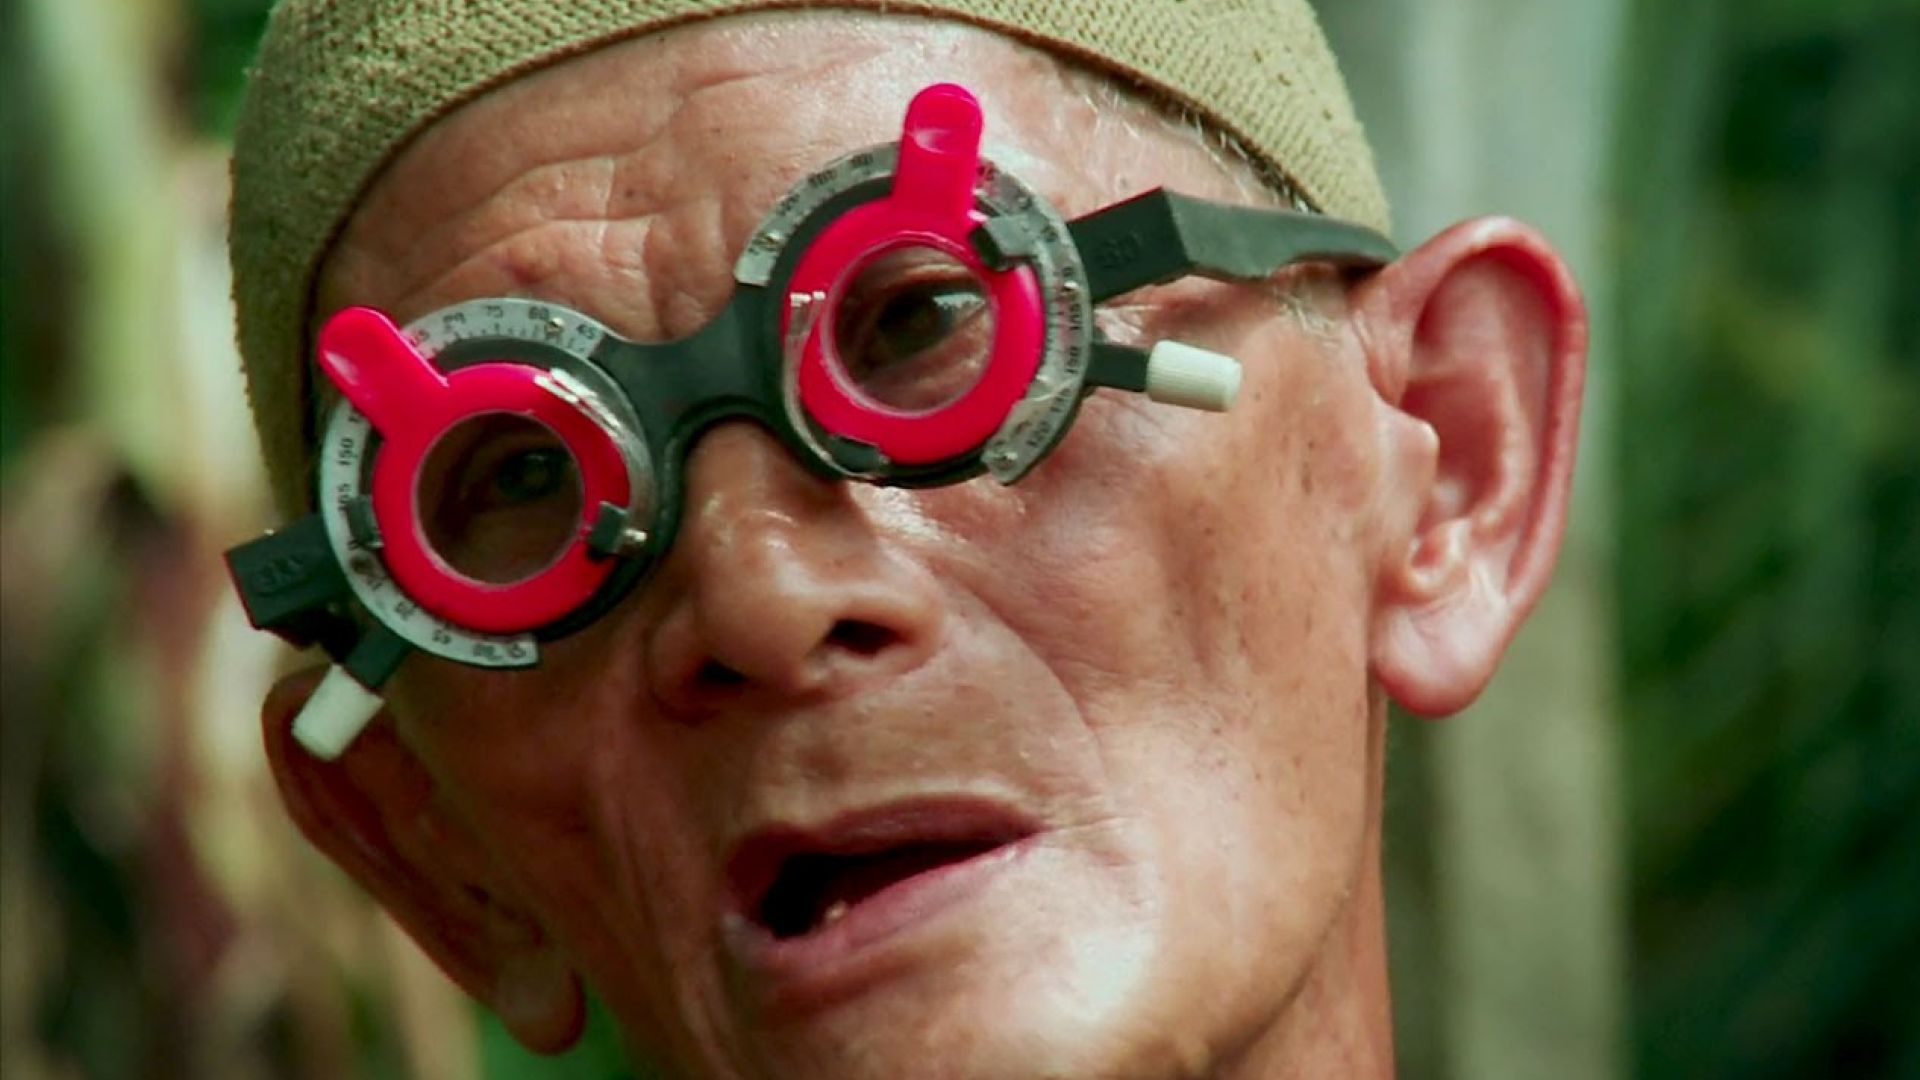 Must-see follow-up doc to Joshua Oppenheimer’s The Act of Killing, The Look of Silence trailer